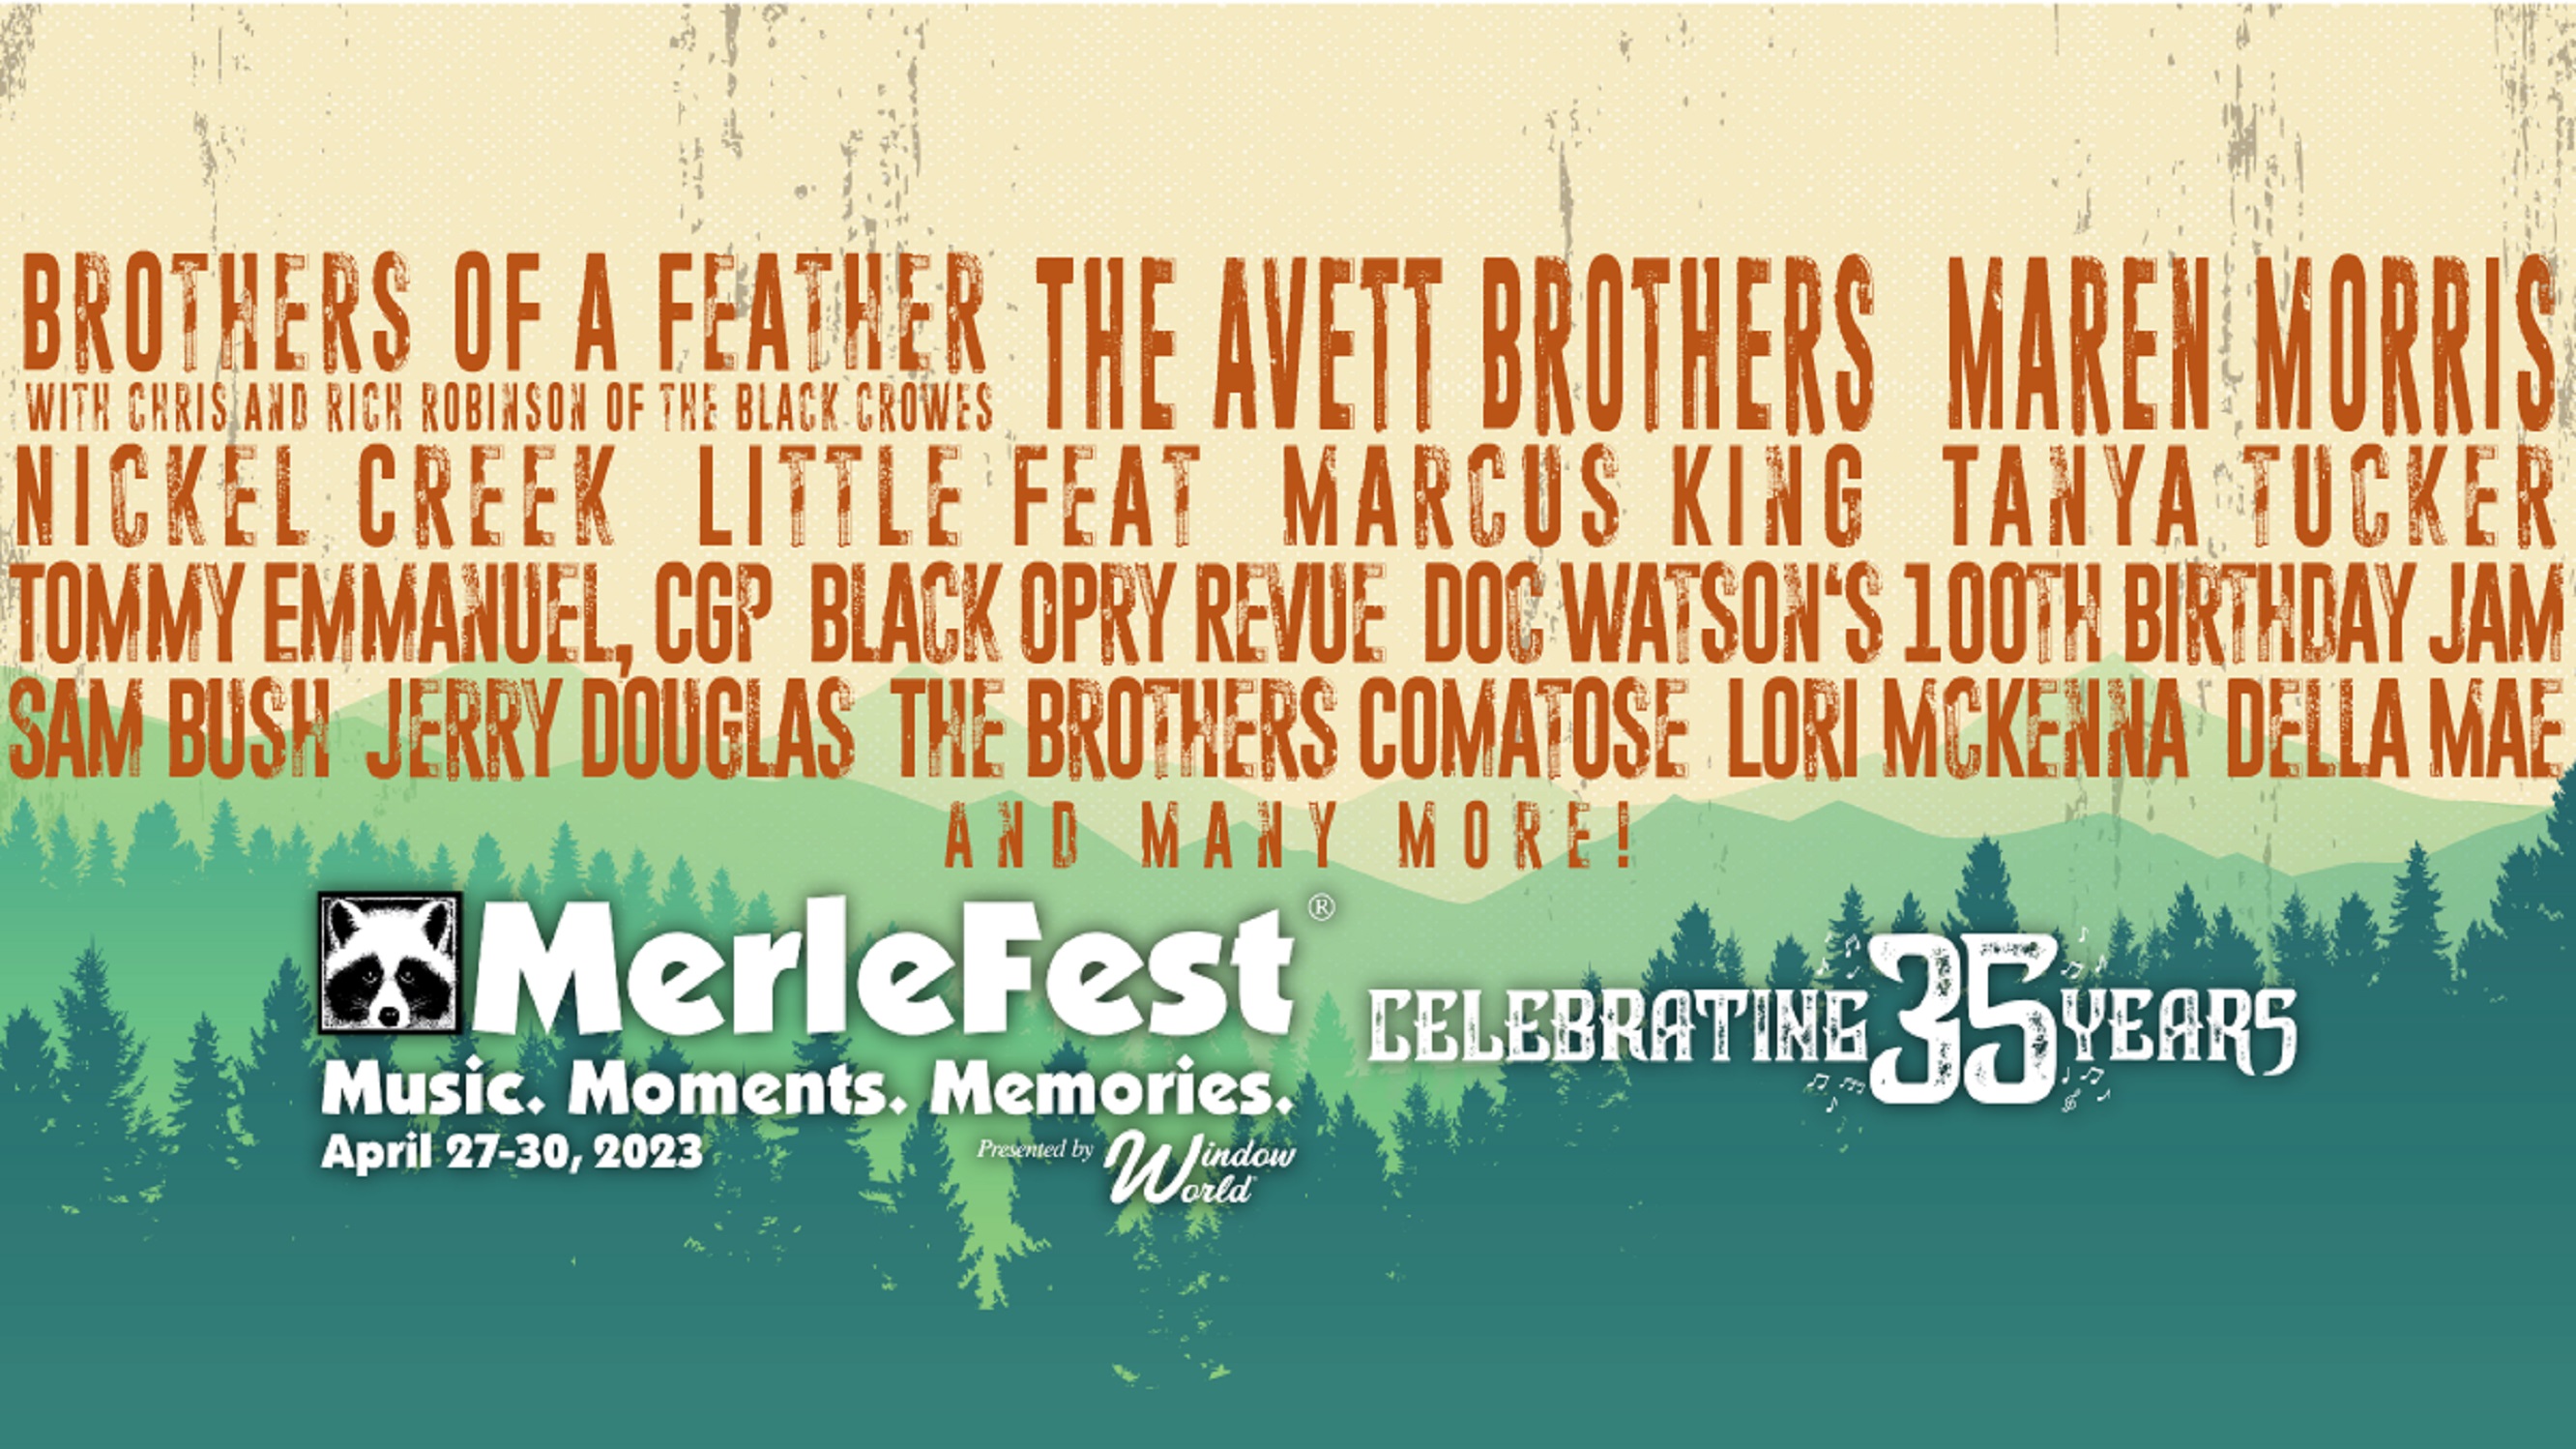 MerleFest Documentary "My Name Is Merle" screening at 2023 Festival, MerleFest archives find a home at Appalachian State University, and more